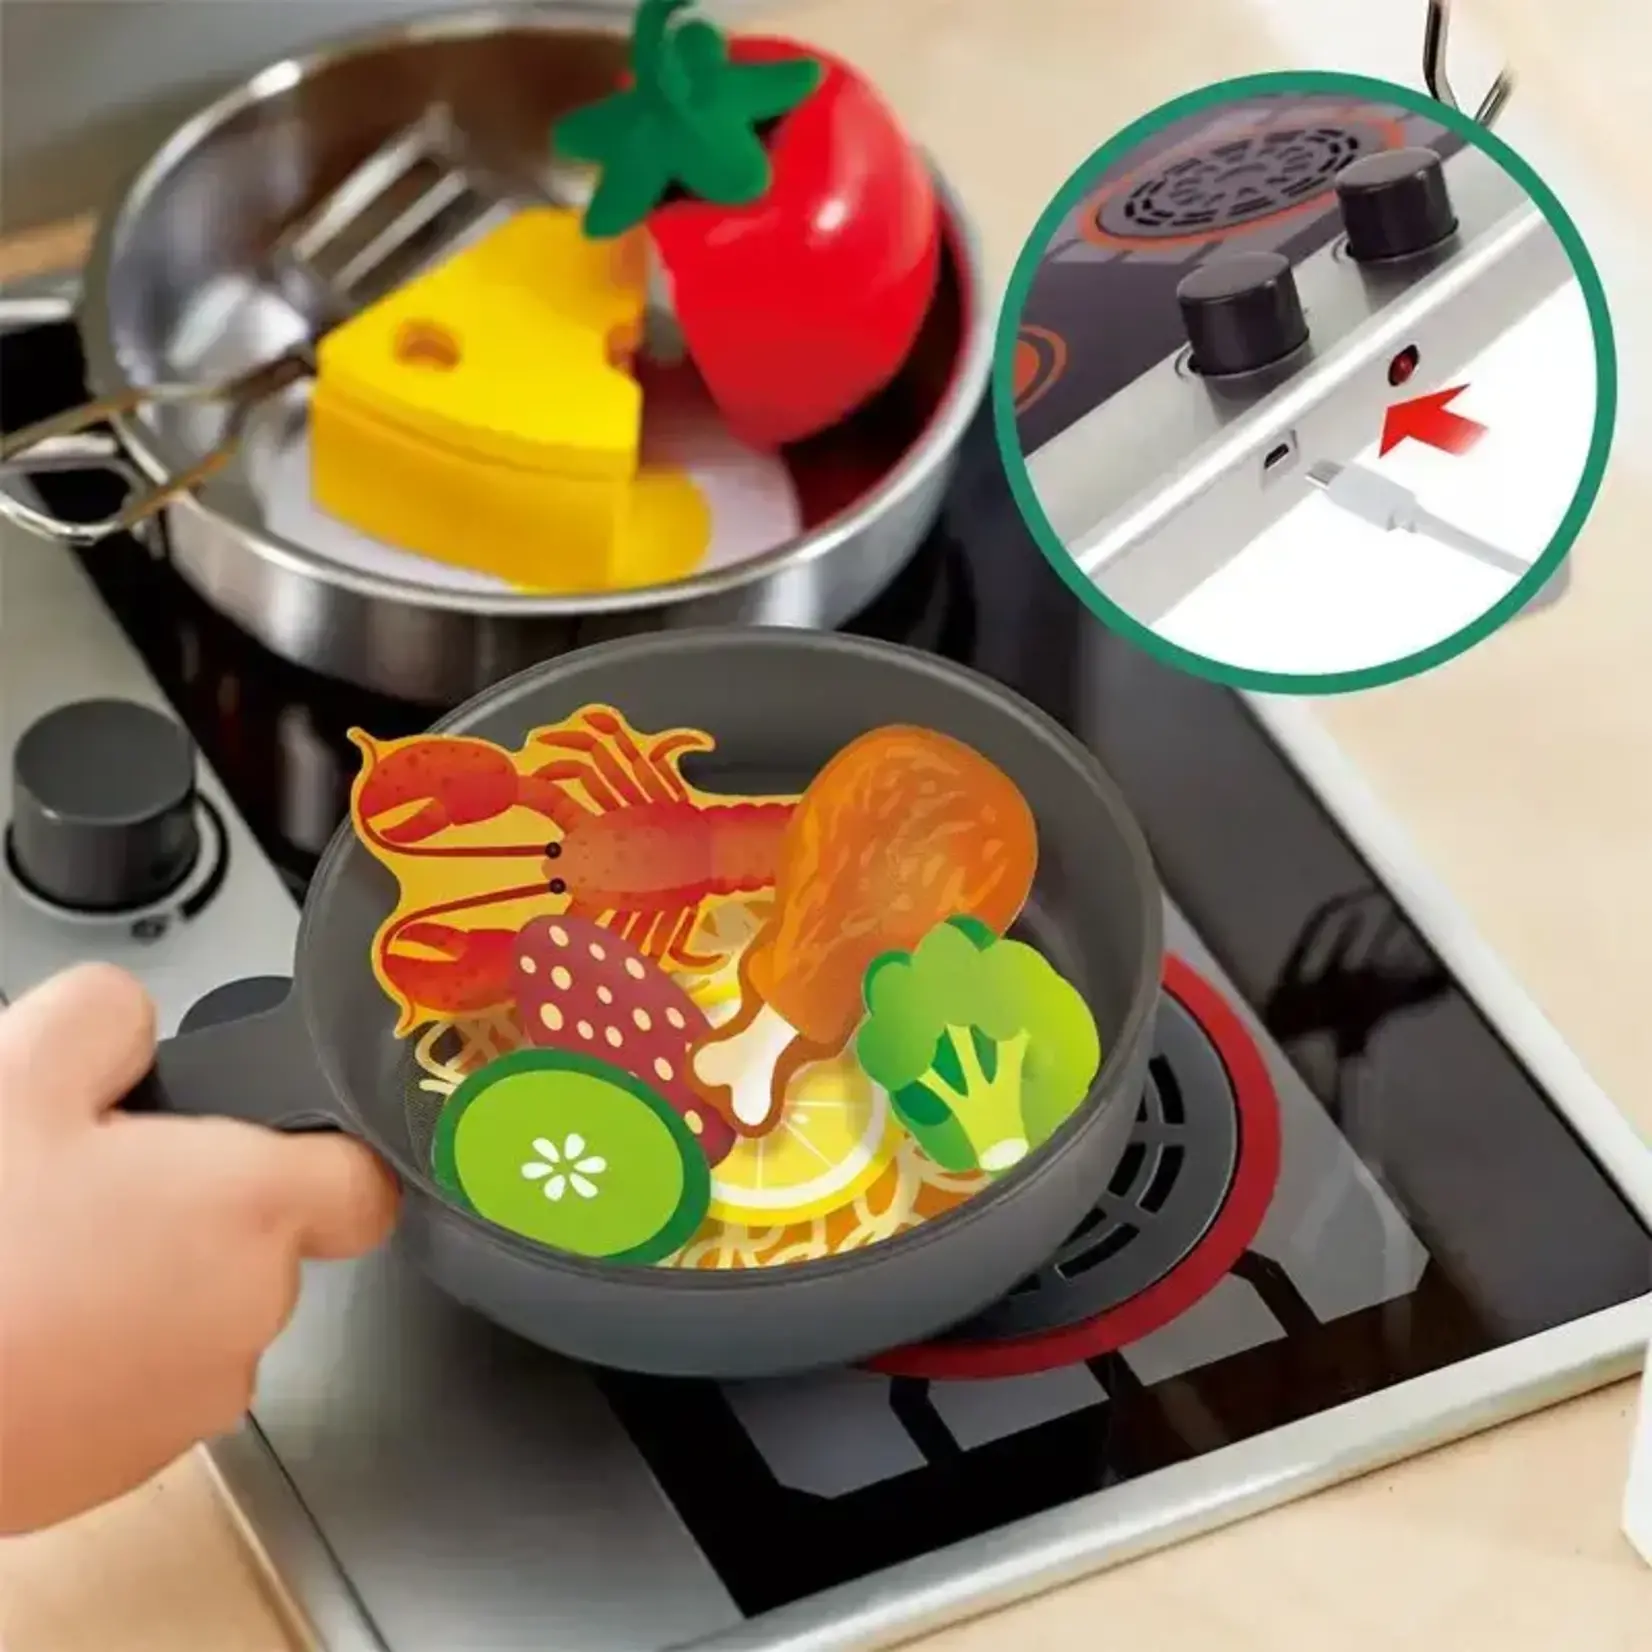 Hape Deluxe Kitchen Playset with Fan Fryer Stove